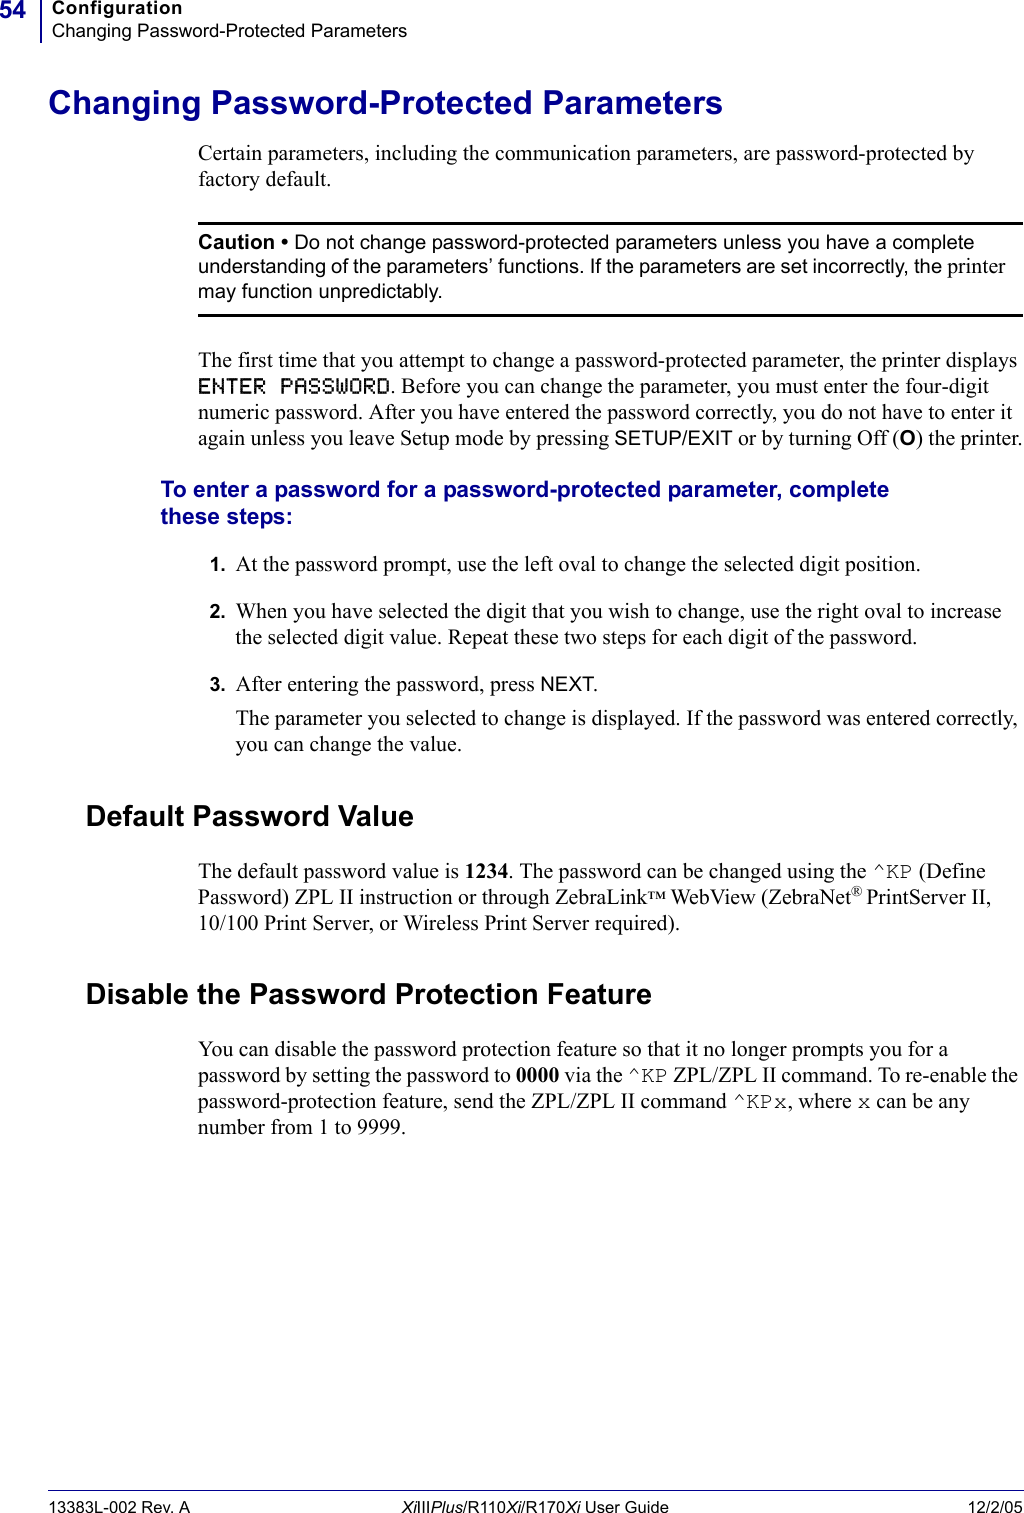 ConfigurationChanging Password-Protected Parameters5413383L-002 Rev. A XiIIIPlus/R110Xi/R170Xi User Guide 12/2/05Changing Password-Protected ParametersCertain parameters, including the communication parameters, are password-protected by factory default.The first time that you attempt to change a password-protected parameter, the printer displays ENTER PASSWORD. Before you can change the parameter, you must enter the four-digit numeric password. After you have entered the password correctly, you do not have to enter it again unless you leave Setup mode by pressing SETUP/EXIT or by turning Off (O) the printer.To enter a password for a password-protected parameter, complete these steps:1. At the password prompt, use the left oval to change the selected digit position.2. When you have selected the digit that you wish to change, use the right oval to increase the selected digit value. Repeat these two steps for each digit of the password.3. After entering the password, press NEXT.The parameter you selected to change is displayed. If the password was entered correctly, you can change the value.Default Password ValueThe default password value is 1234. The password can be changed using the ^KP (Define Password) ZPL II instruction or through ZebraLink™ WebView (ZebraNet®PrintServer II, 10/100 Print Server, or Wireless Print Server required).Disable the Password Protection FeatureYou can disable the password protection feature so that it no longer prompts you for a password by setting the password to 0000 via the ^KP ZPL/ZPL II command. To re-enable the password-protection feature, send the ZPL/ZPL II command ^KPx, where x can be any number from 1 to 9999.Caution • Do not change password-protected parameters unless you have a complete understanding of the parameters’ functions. If the parameters are set incorrectly, the printer may function unpredictably.